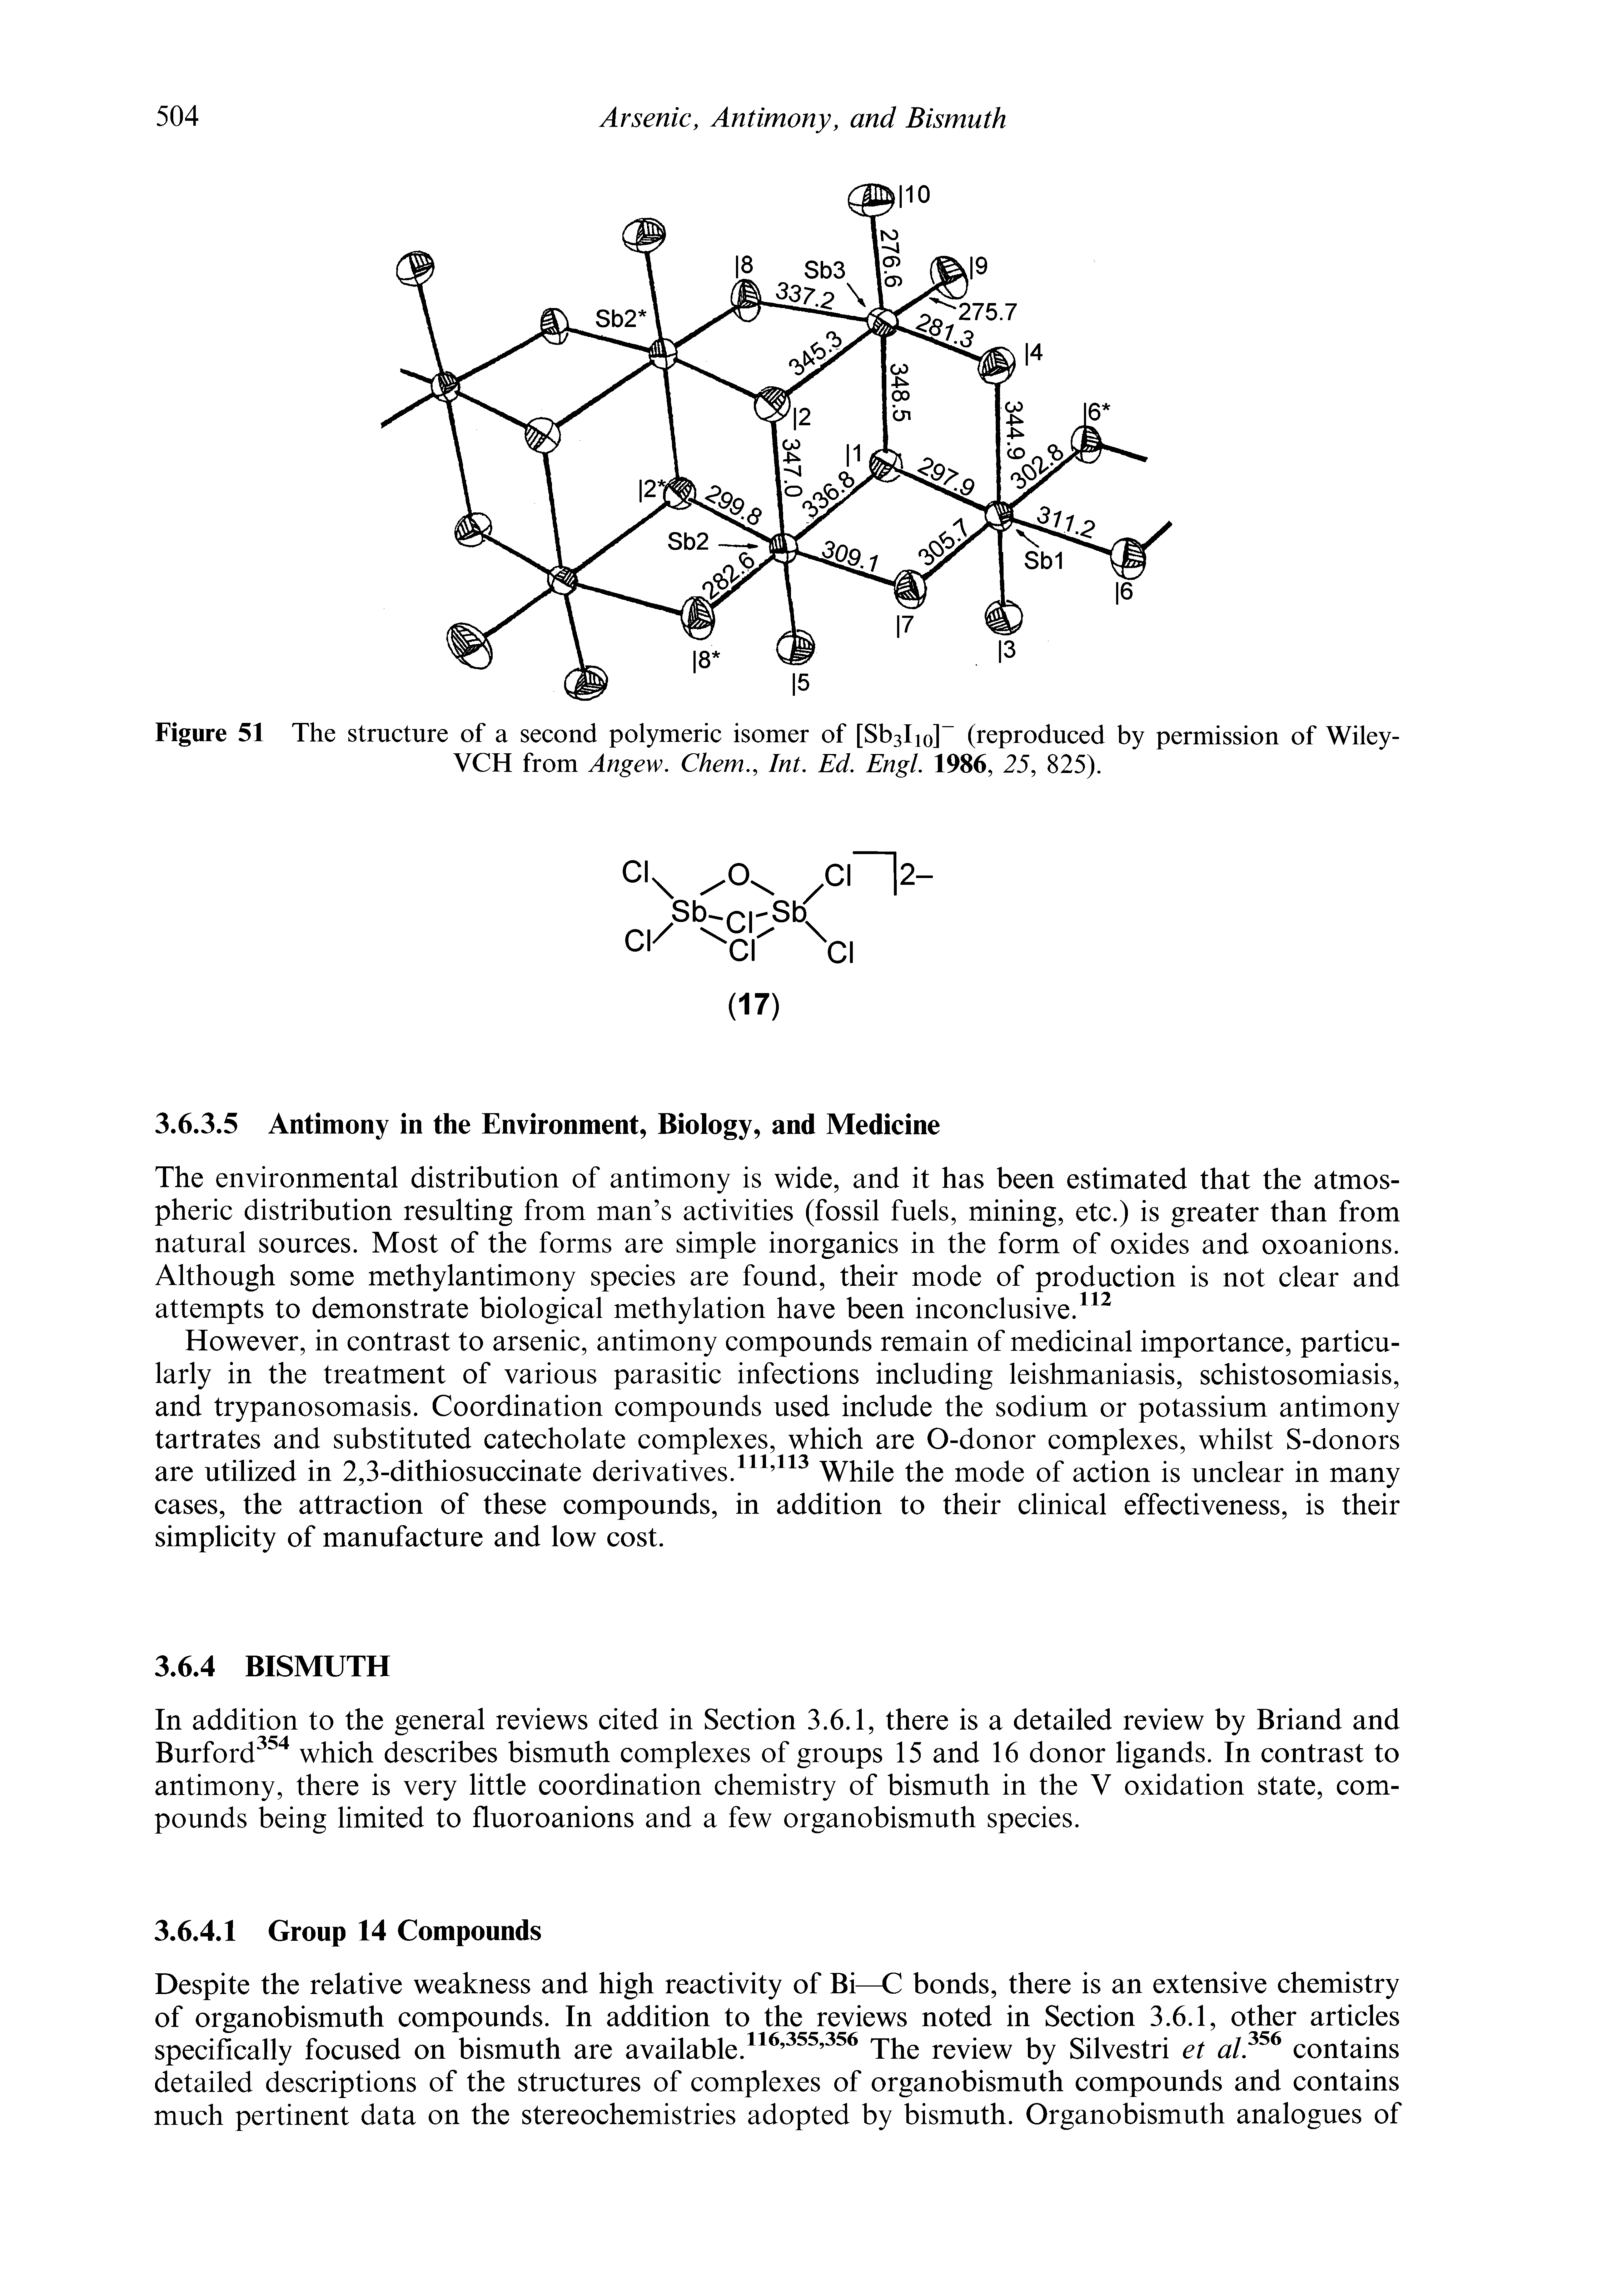 Figure 51 The structure of a second polymeric isomer of [Sbslio] (reproduced by permission of Wiley-VCH from Angew. Chem., Int. Ed. Engl. 1986, 25, 825).